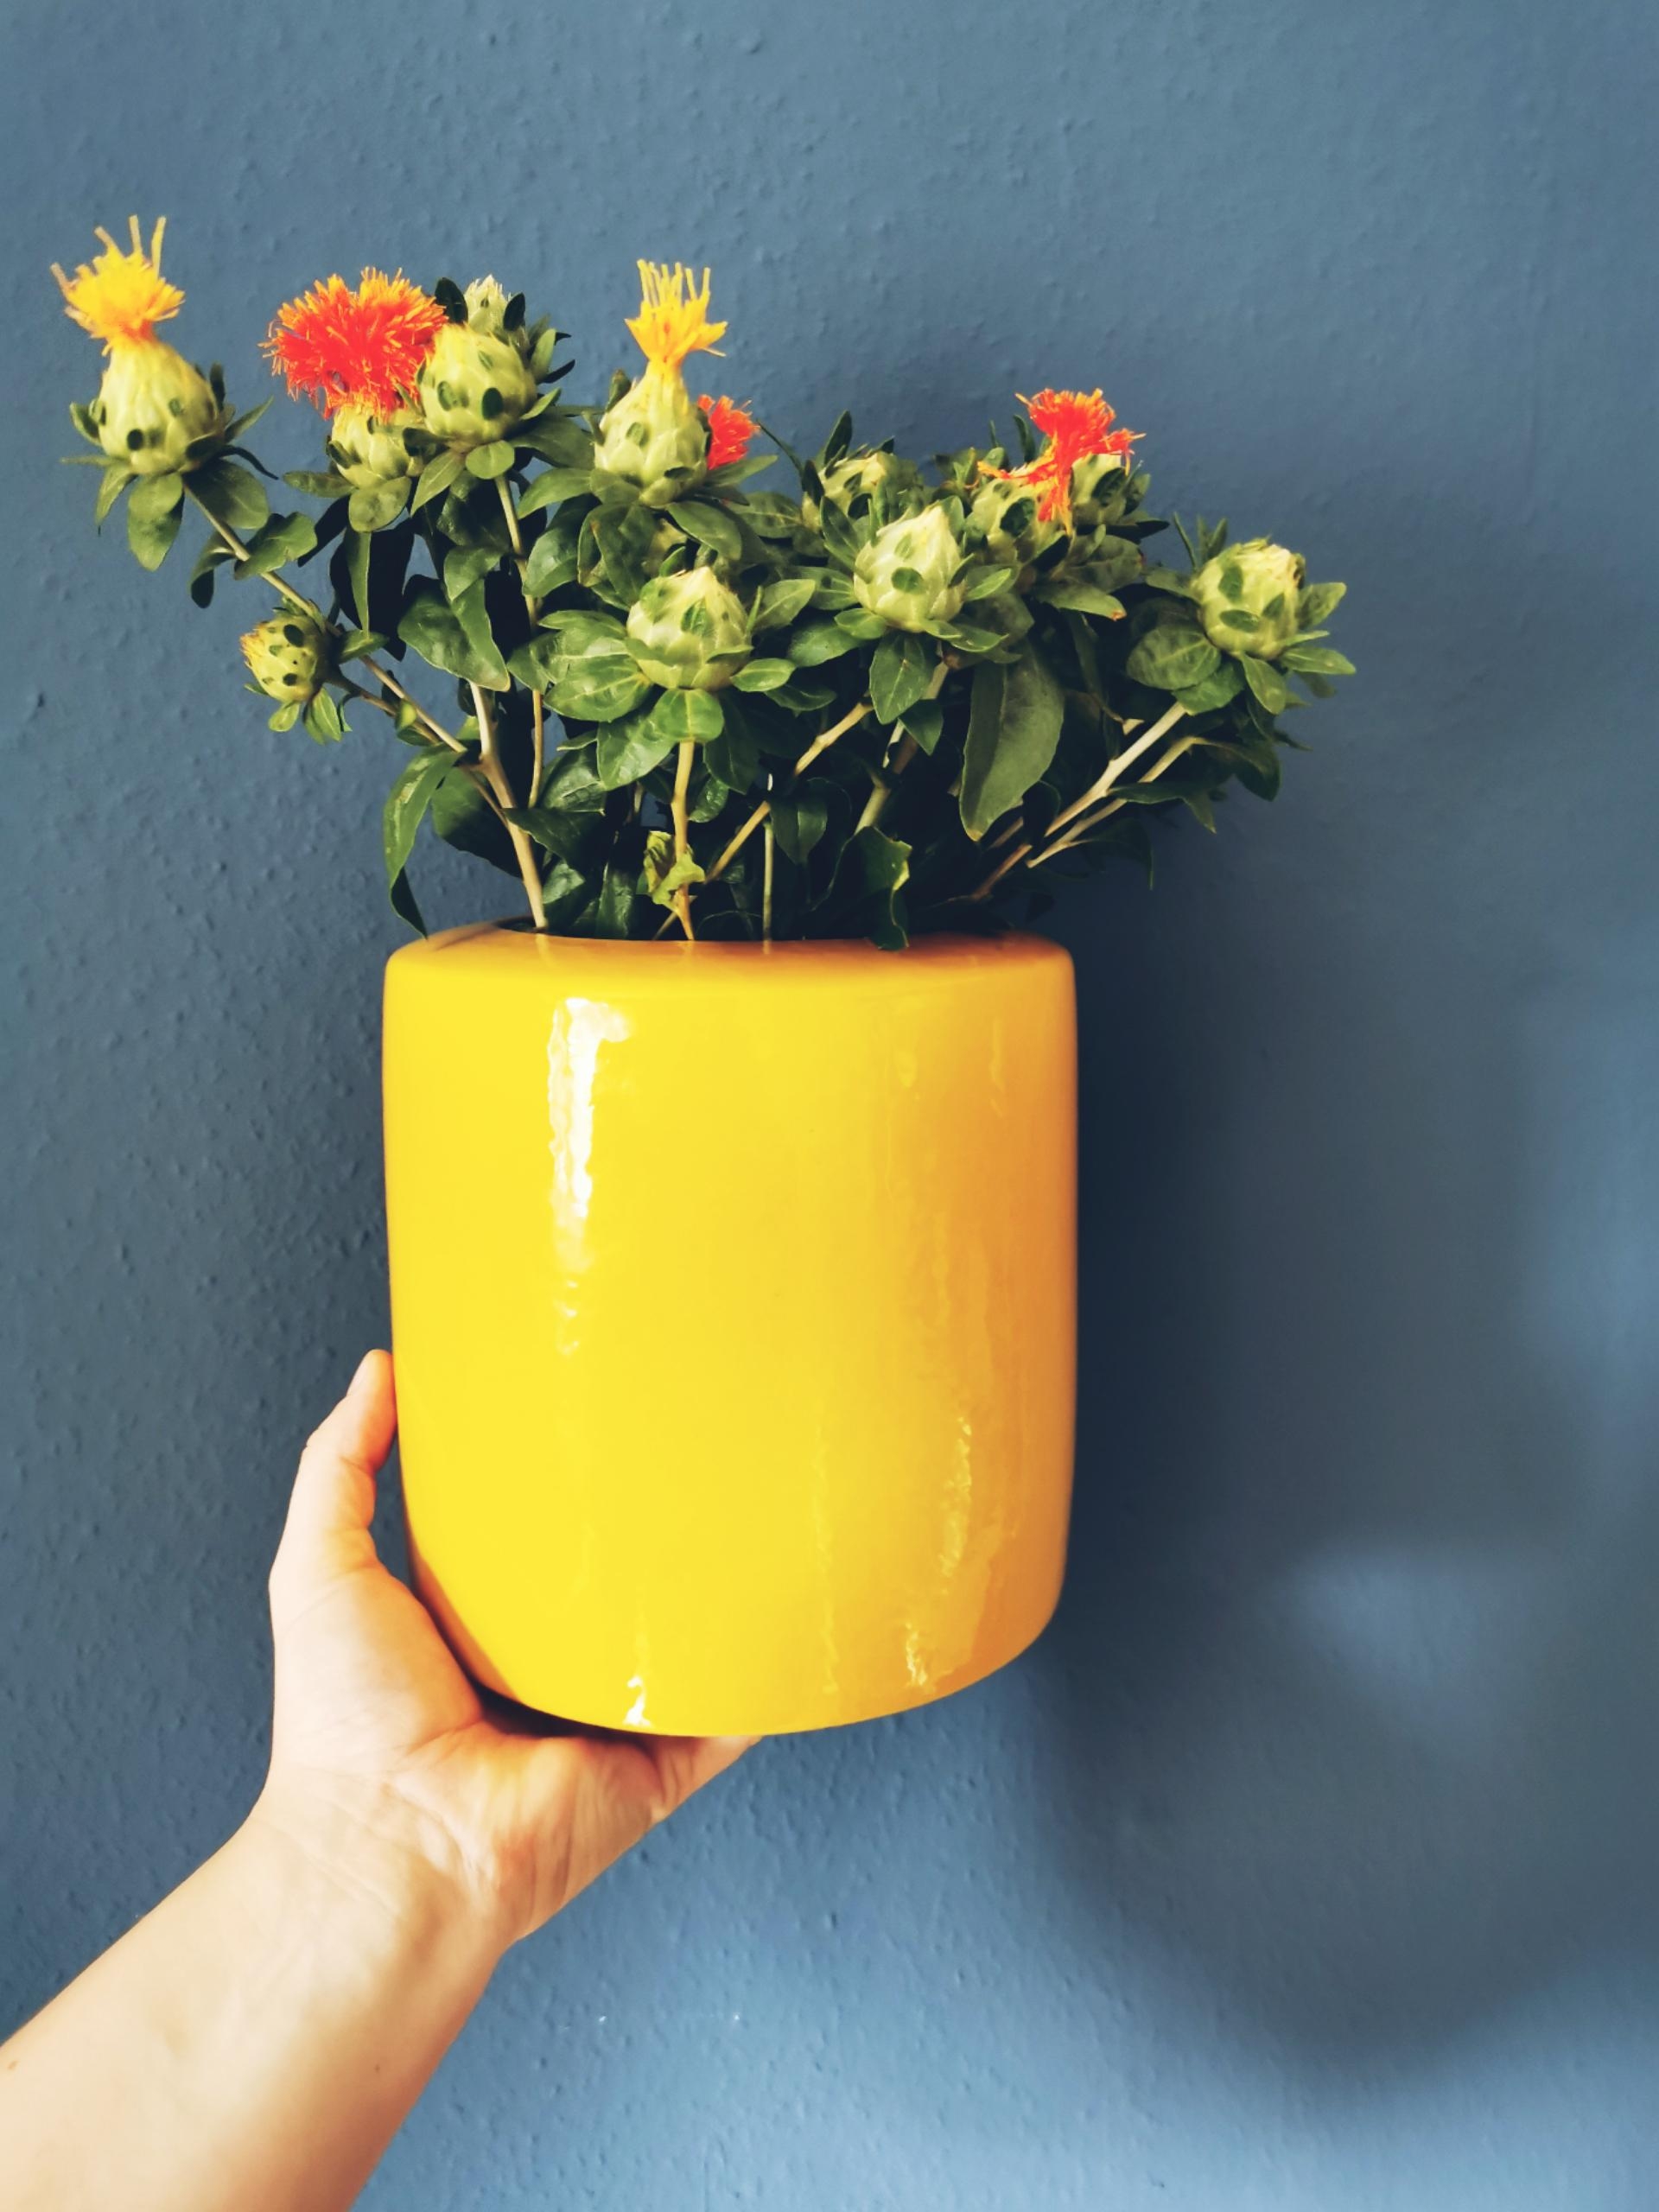 Große Distel Liebe #flowers #deco #vase #yellow #love #bluewall #newhome #cologne 